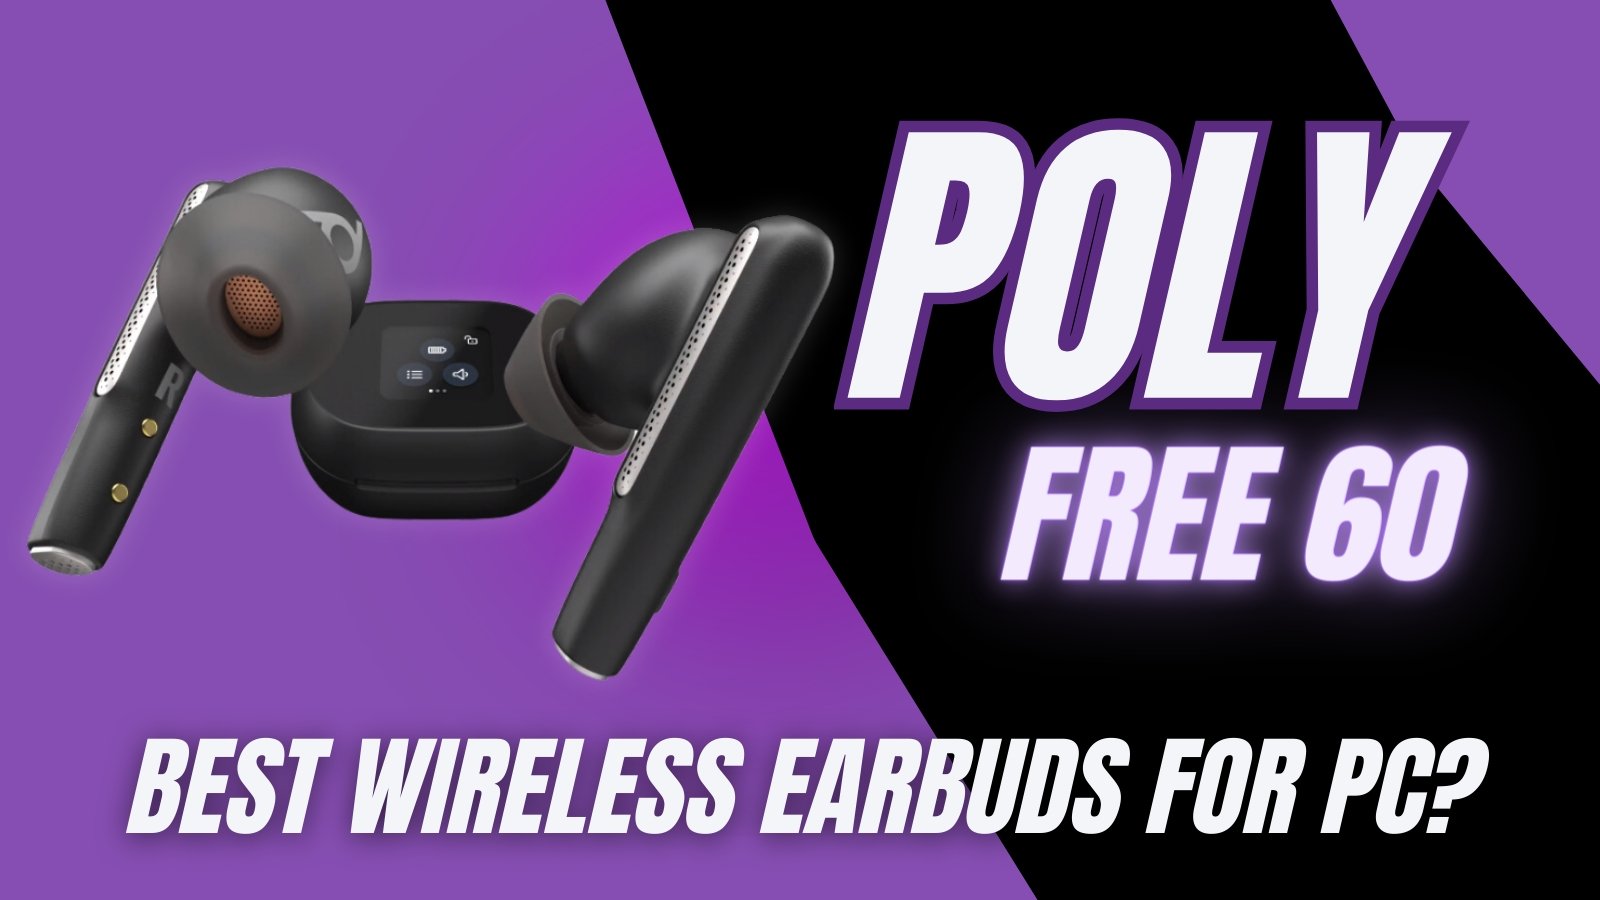 Earbuds The Voyager 60 Are For Poly PC? Free Best The